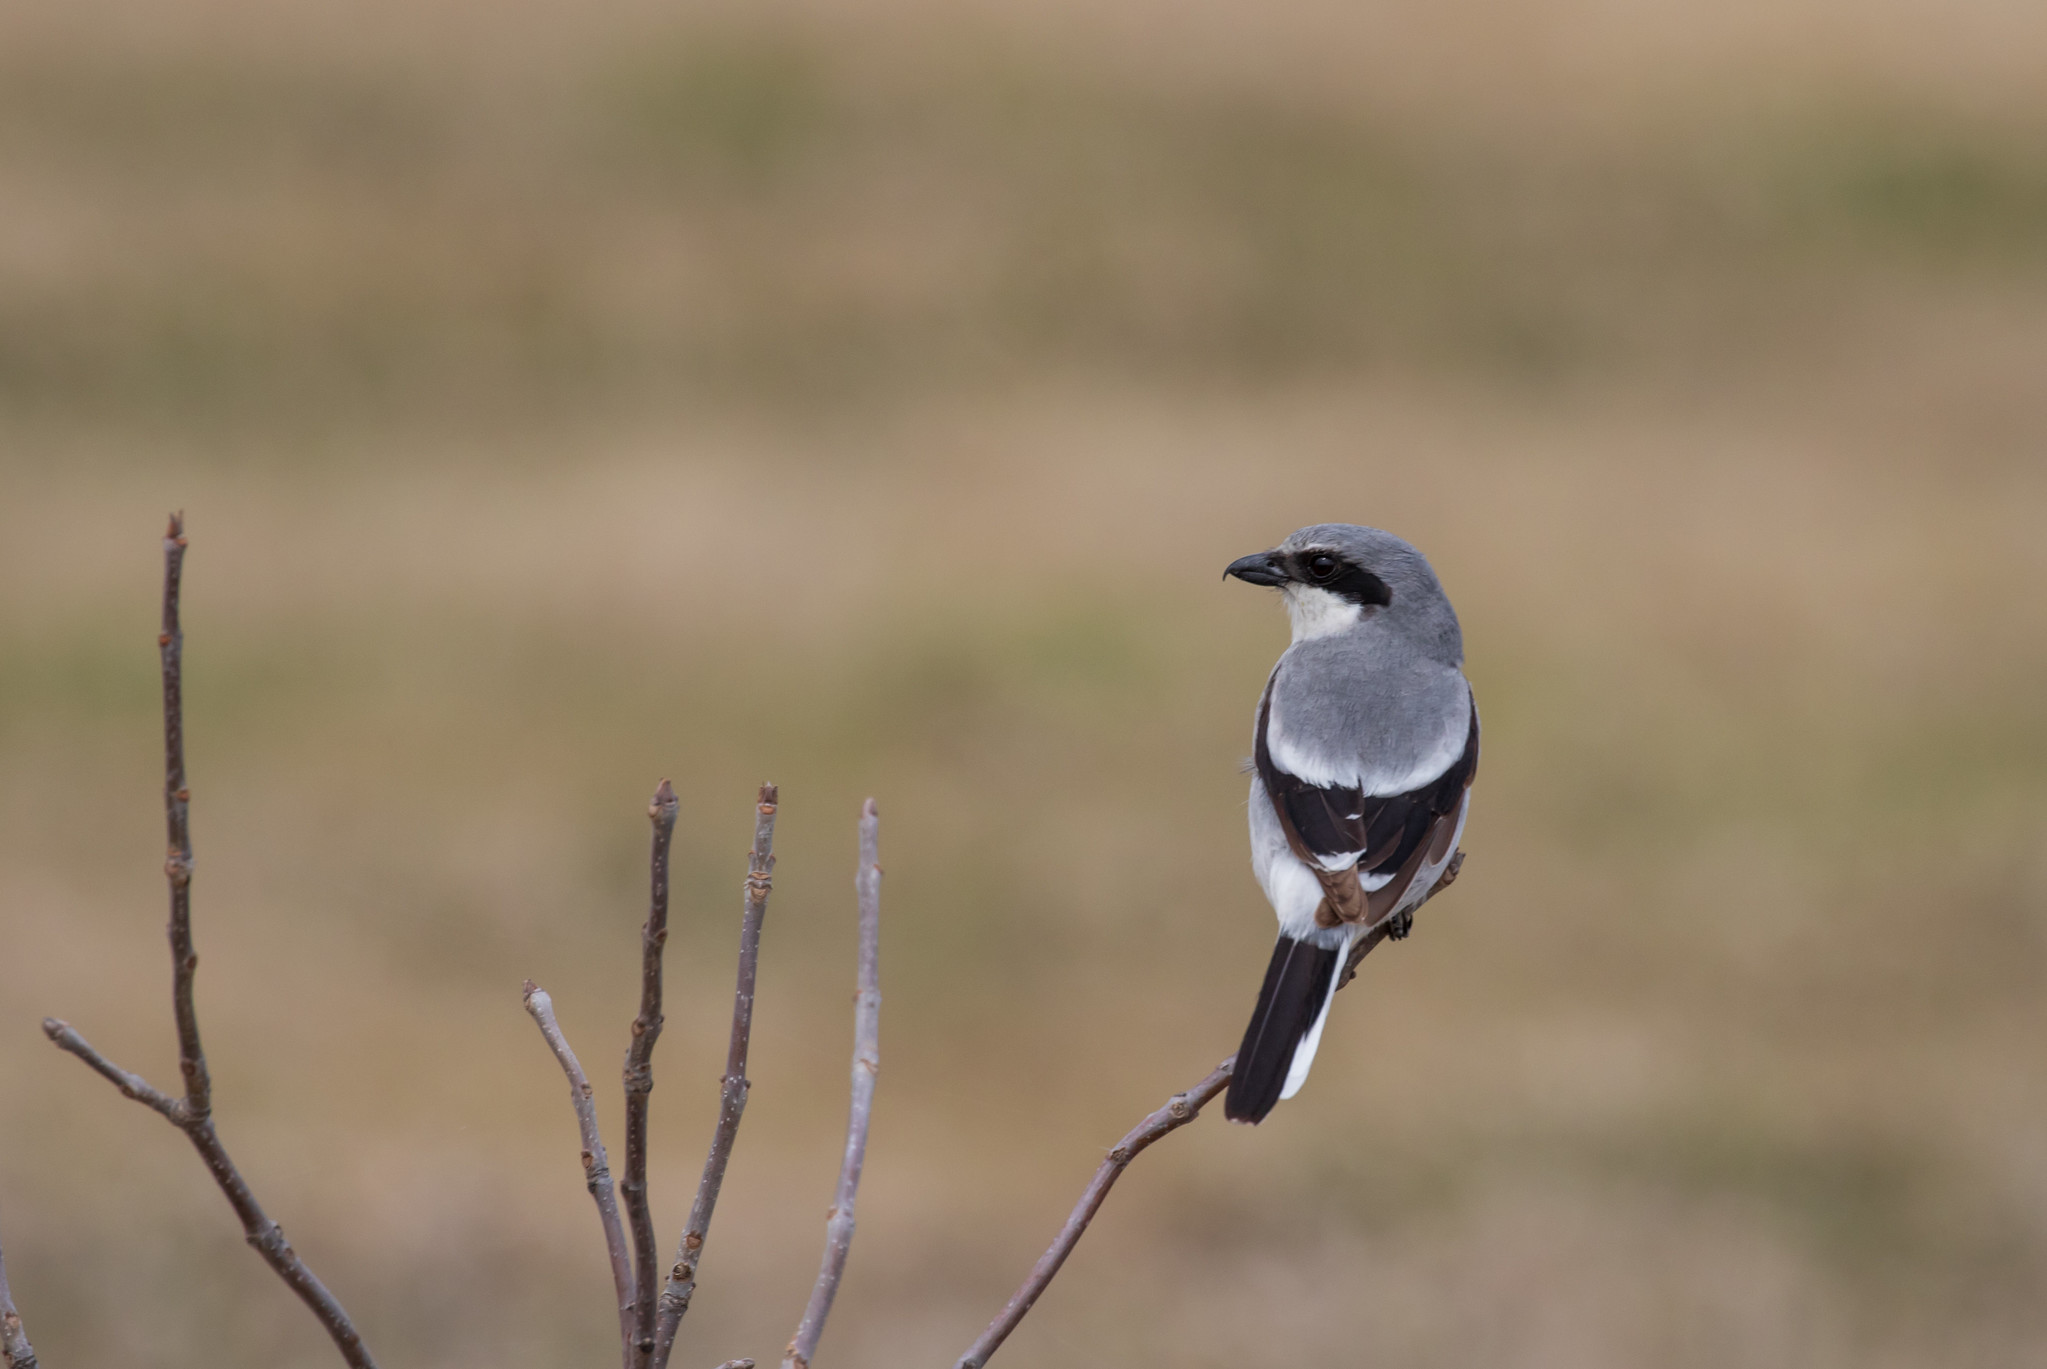 A loggerhead shrike perched on the tip of a bare branch, with a grassy field in the background.